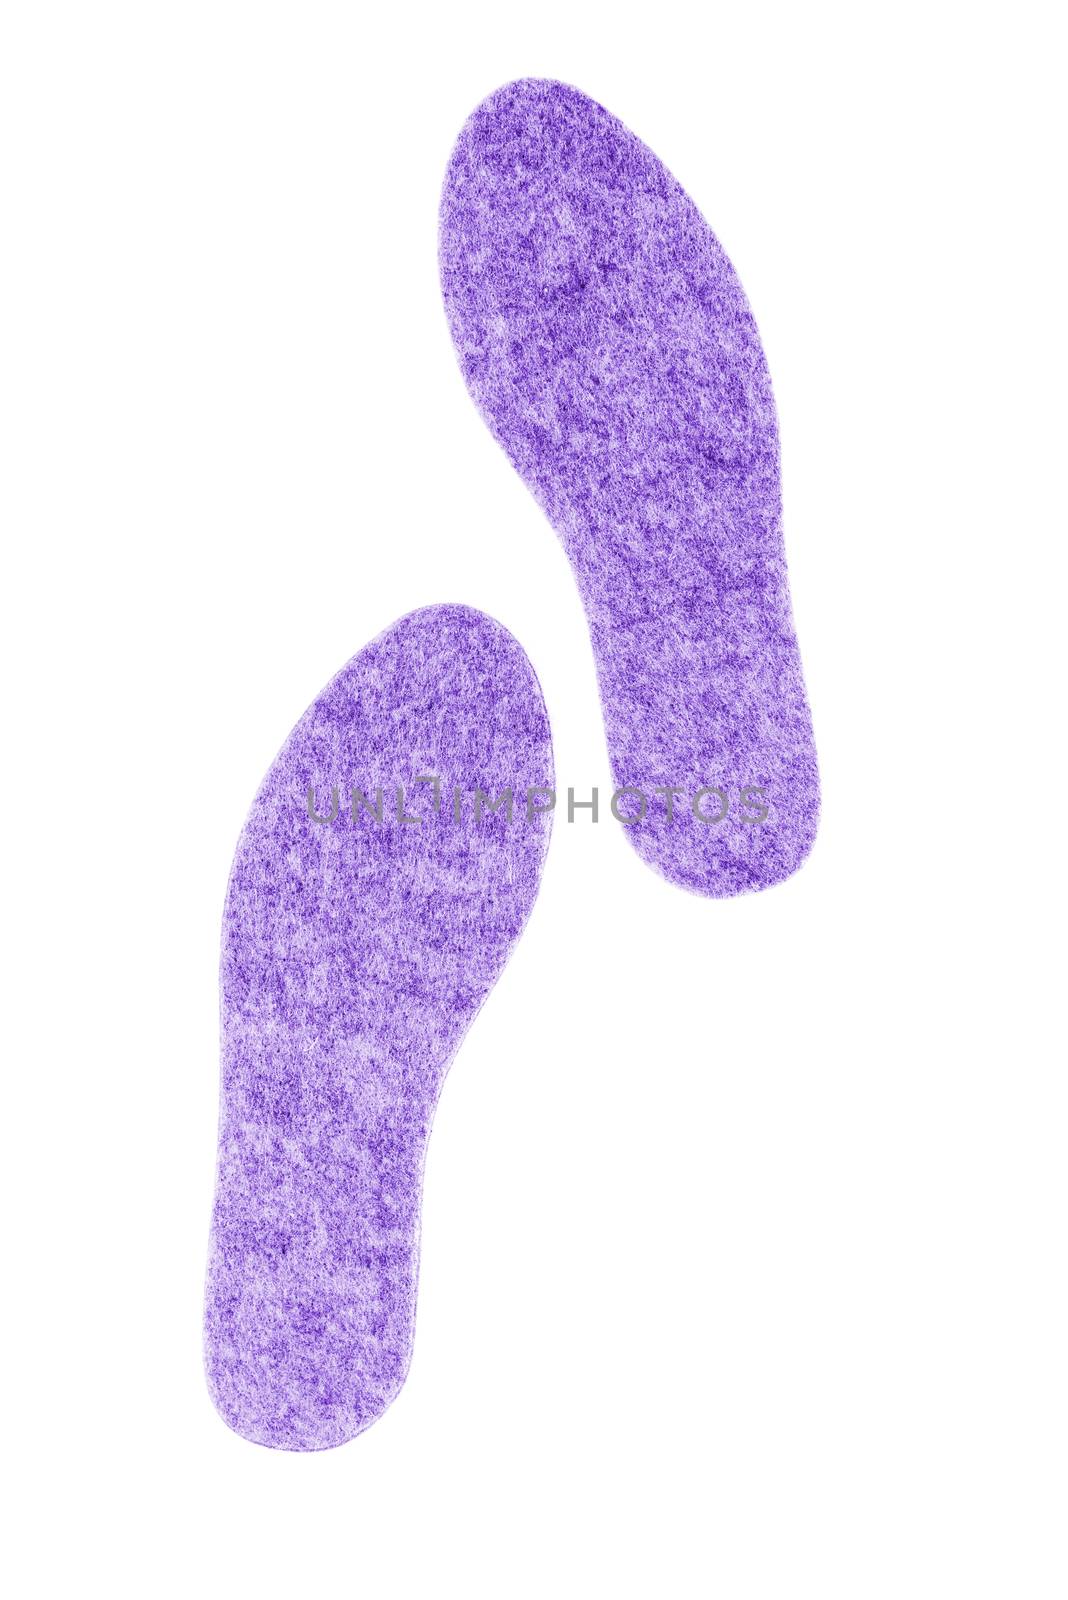 Pair of violet felt insoles isolated on white background